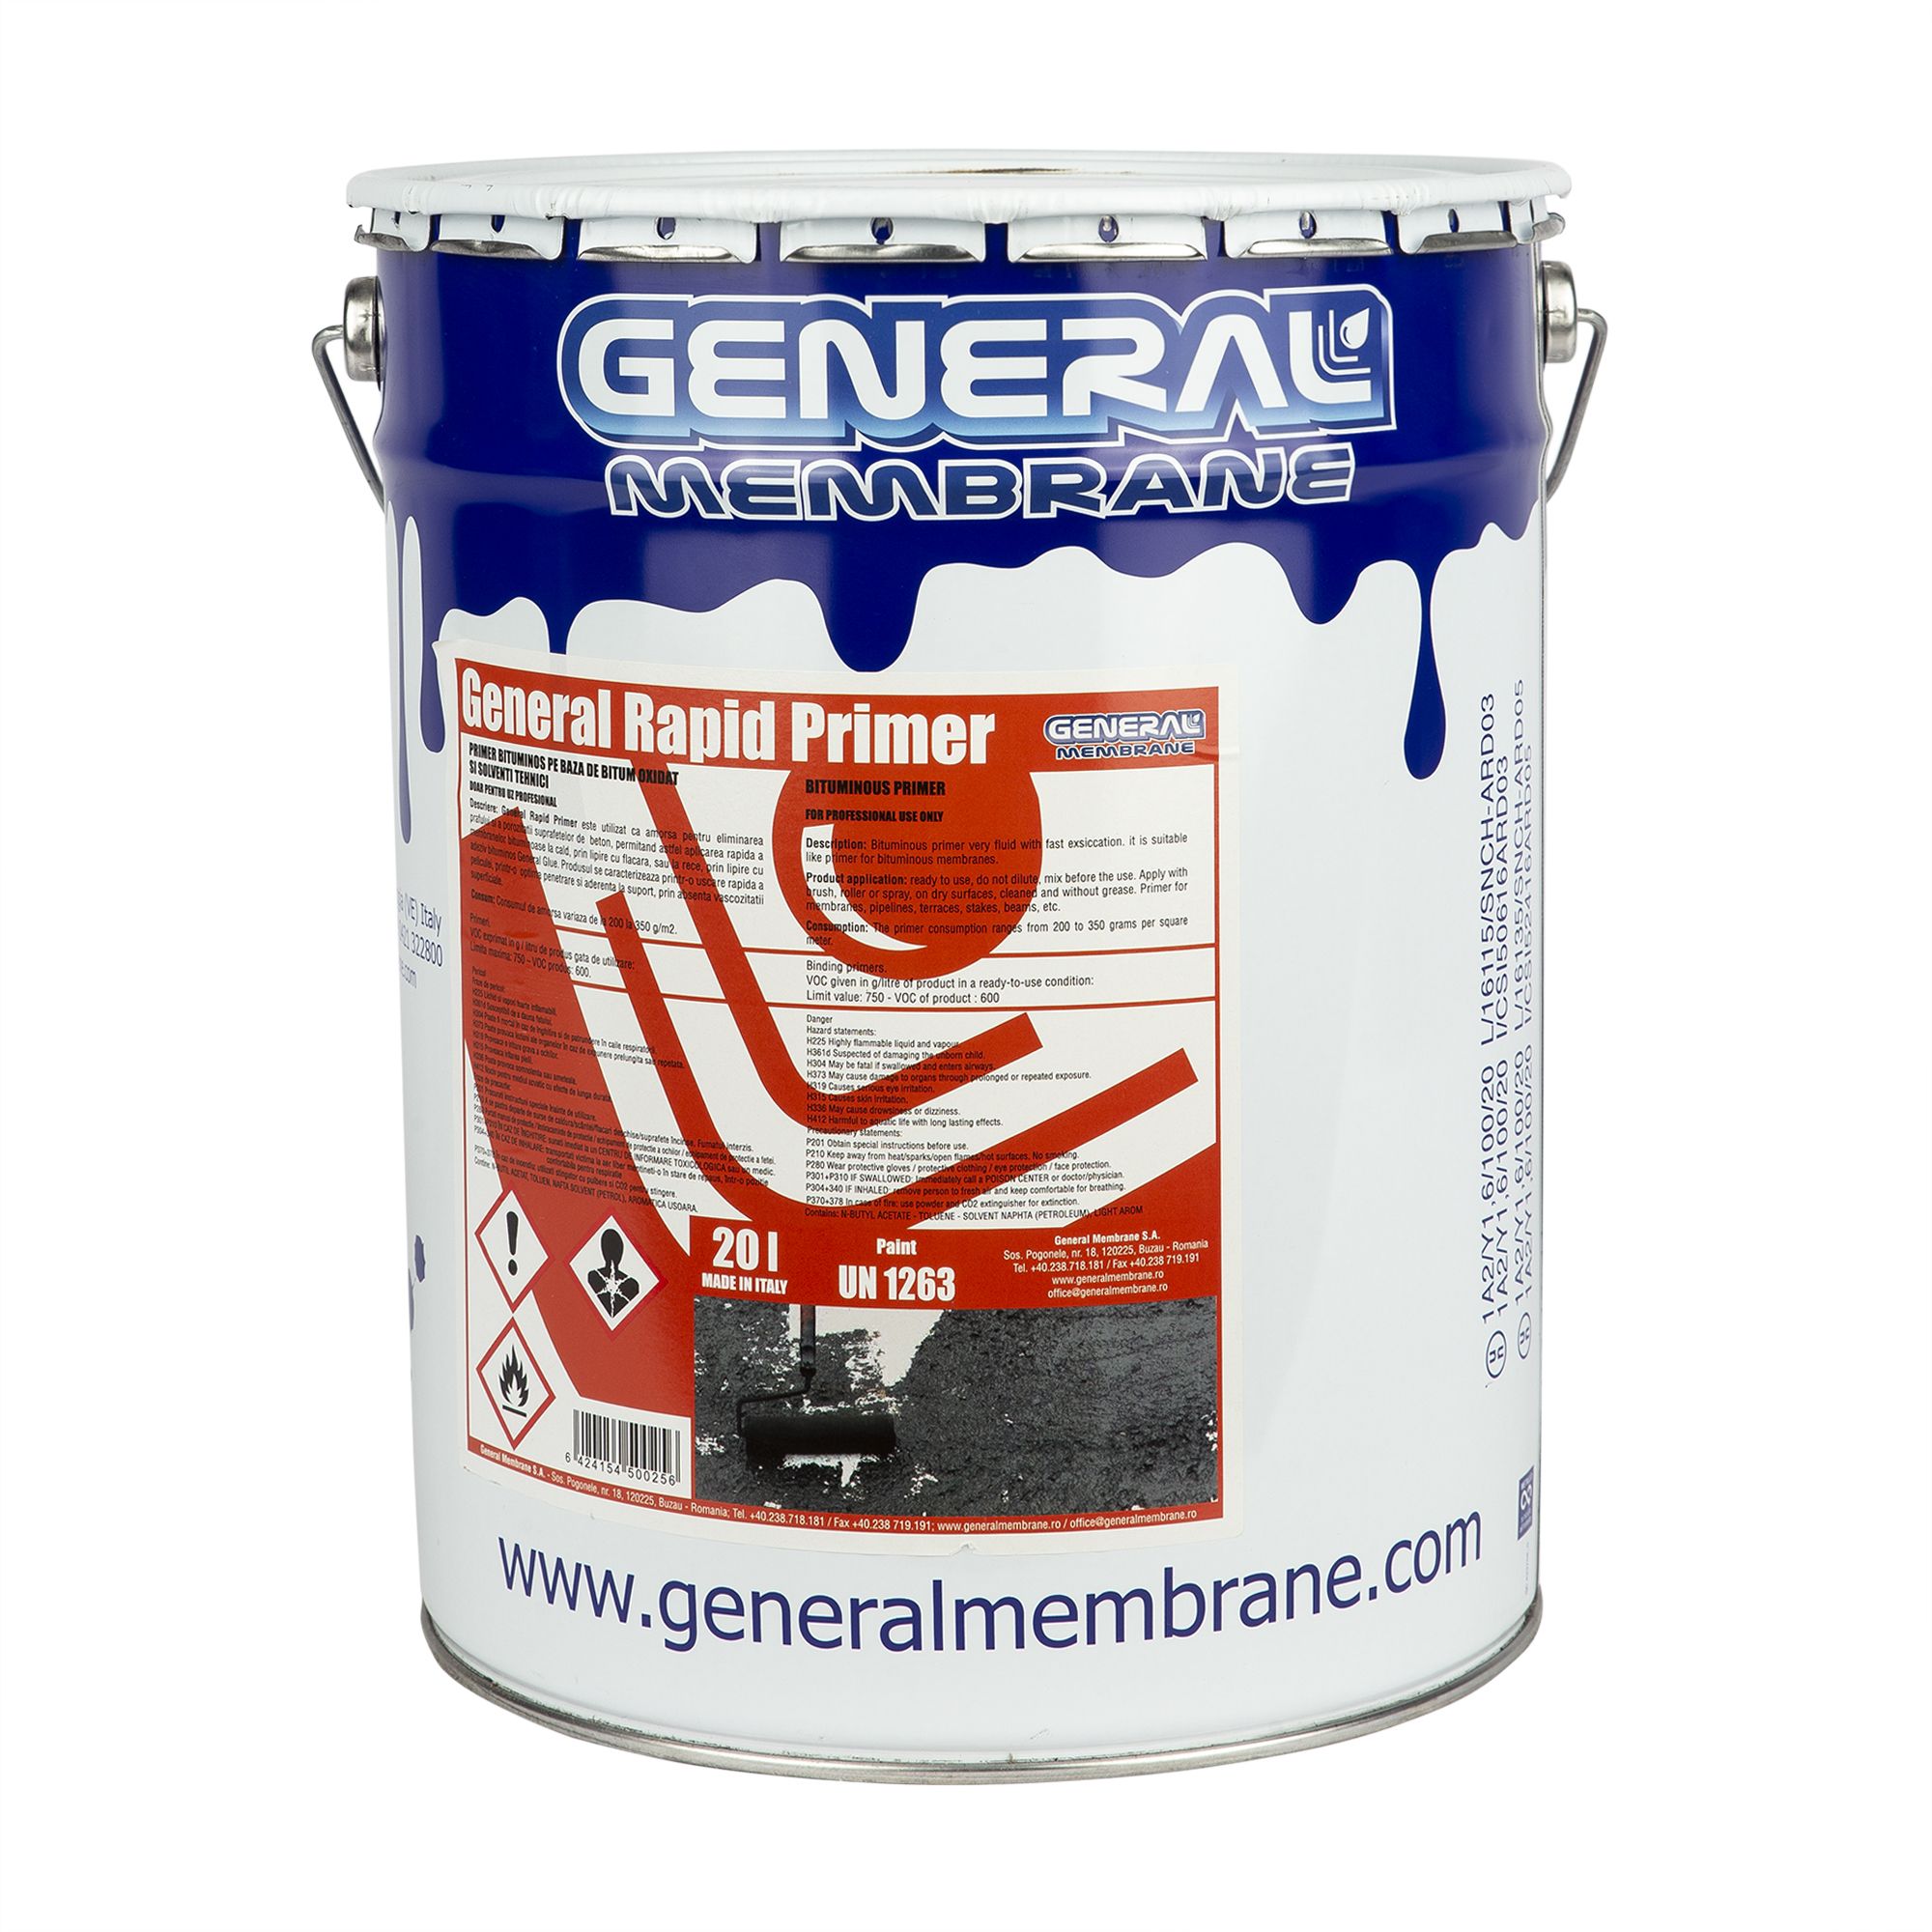 Products for waterproofing and sealing - GM General Rapid Primer Bituminous Solution 20L, https:maxbau.ro